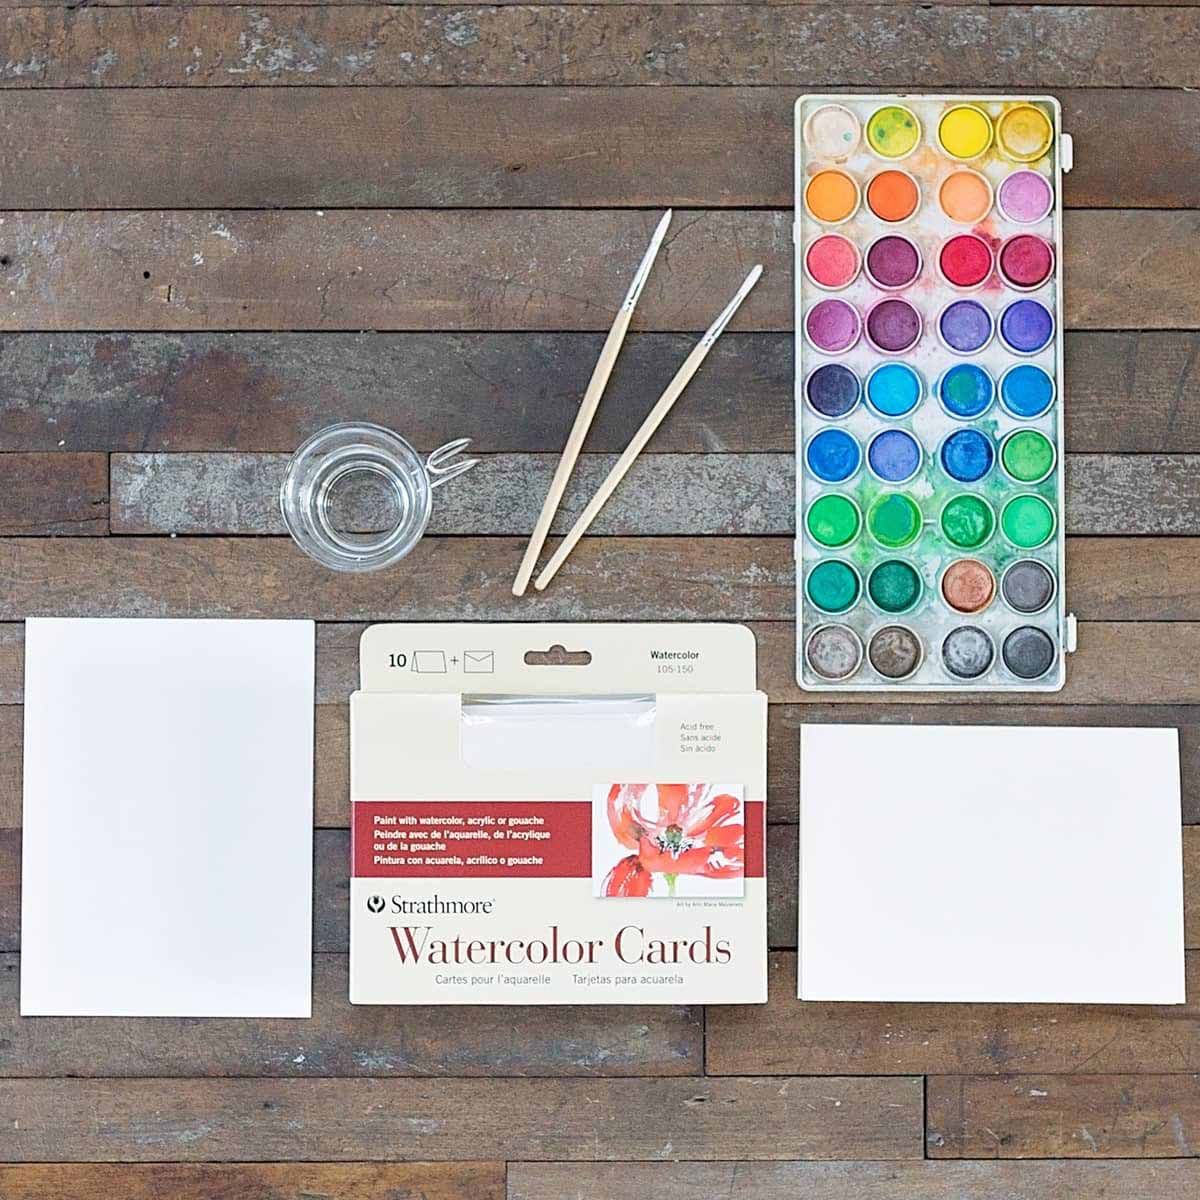 Cold pressed watercolor surface